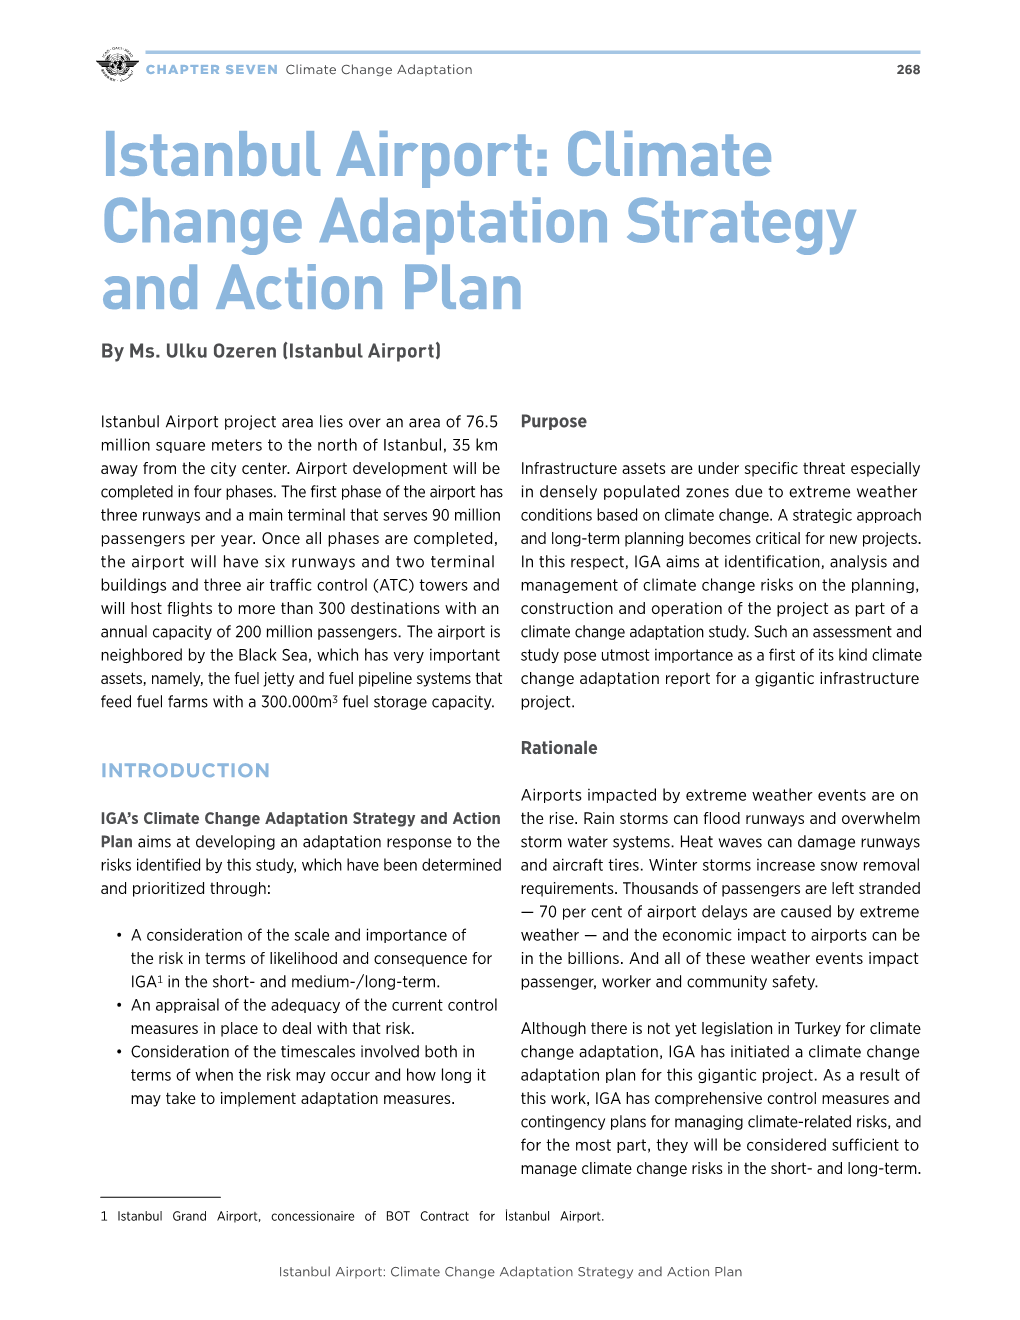 Istanbul Airport: Climate Change Adaptation Strategy and Action Plan by Ms